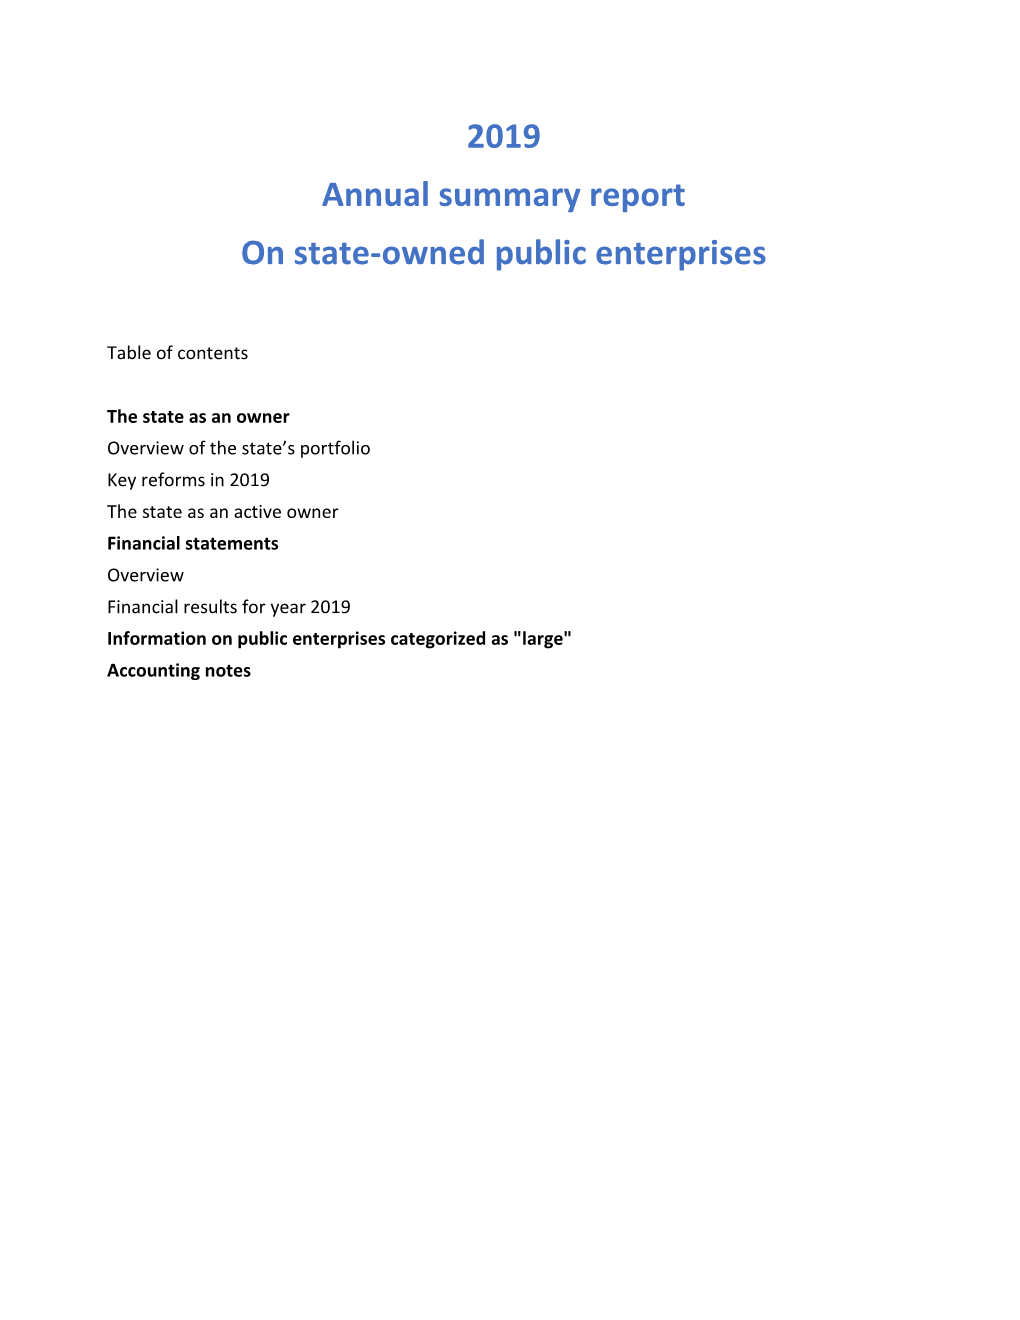 2019 Annual Summary Report on State-Owned Public Enterprises